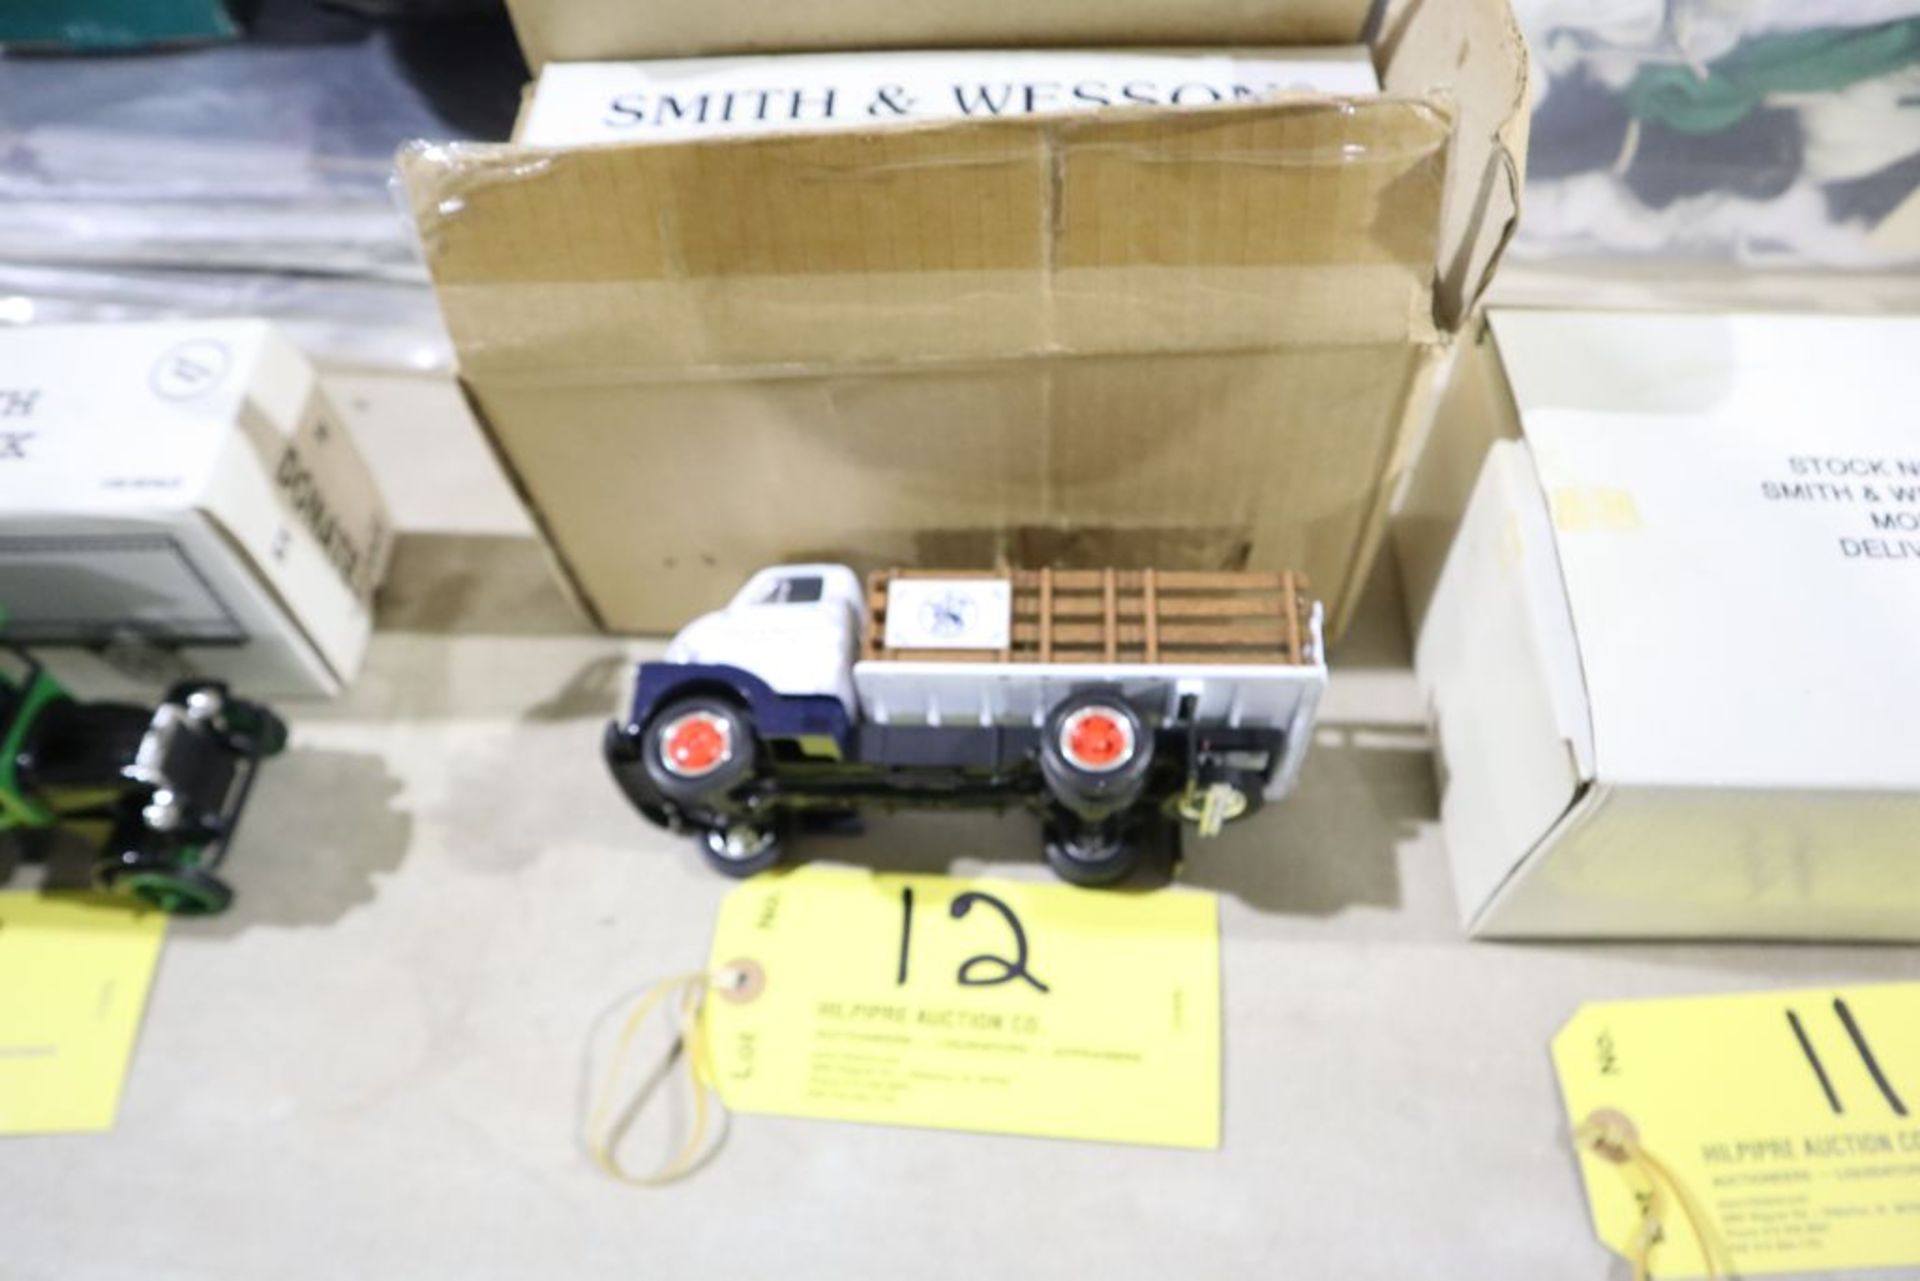 Smith & Wesson scale model bank 1952 GMC stake truck, 1/34 scale.